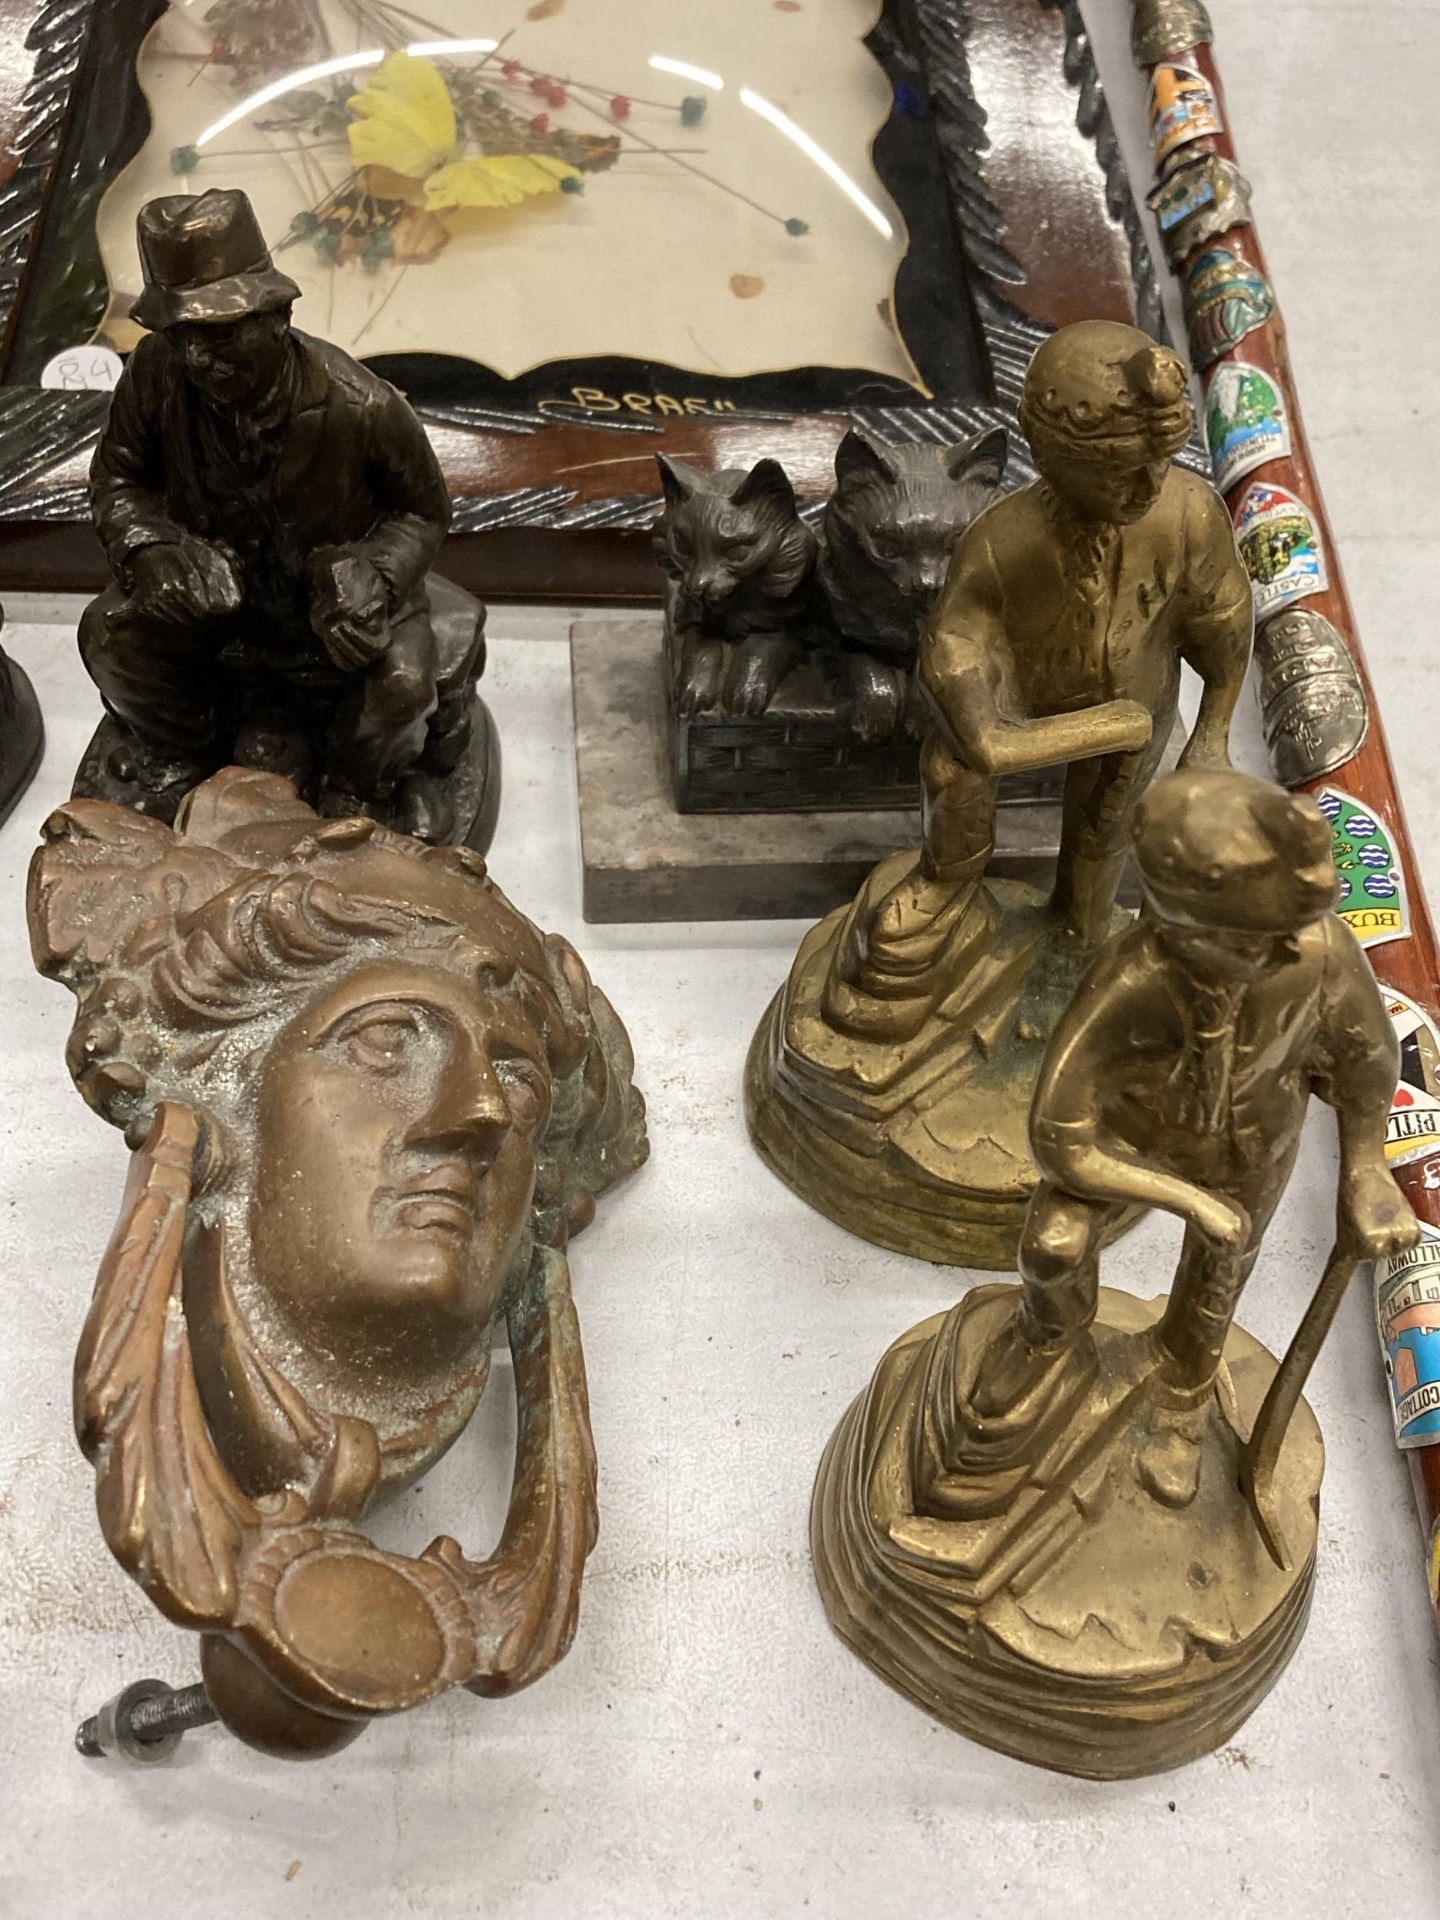 A QUANTITY OF VINTAGE BRASSWARE TO INCLUDE A DOOR KNOCKER, FIGURES, CATS, A GALLEON WALL HANGING PEN - Image 3 of 5